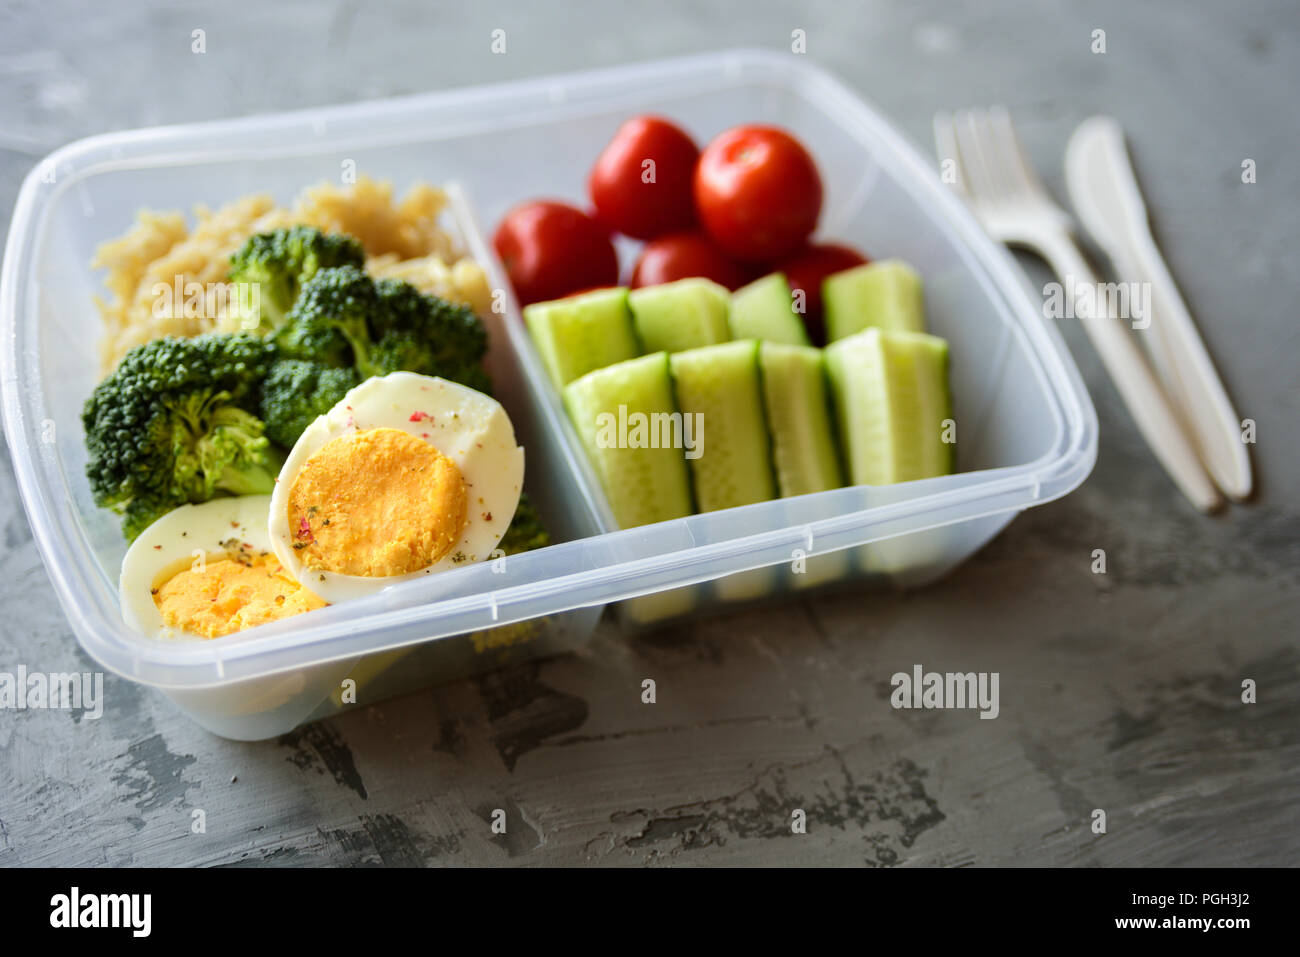 Lunch box with healthy food. Rice, broccoli, tomato, cucumber, eggs, apple and water. On grey concrete background Stock Photo